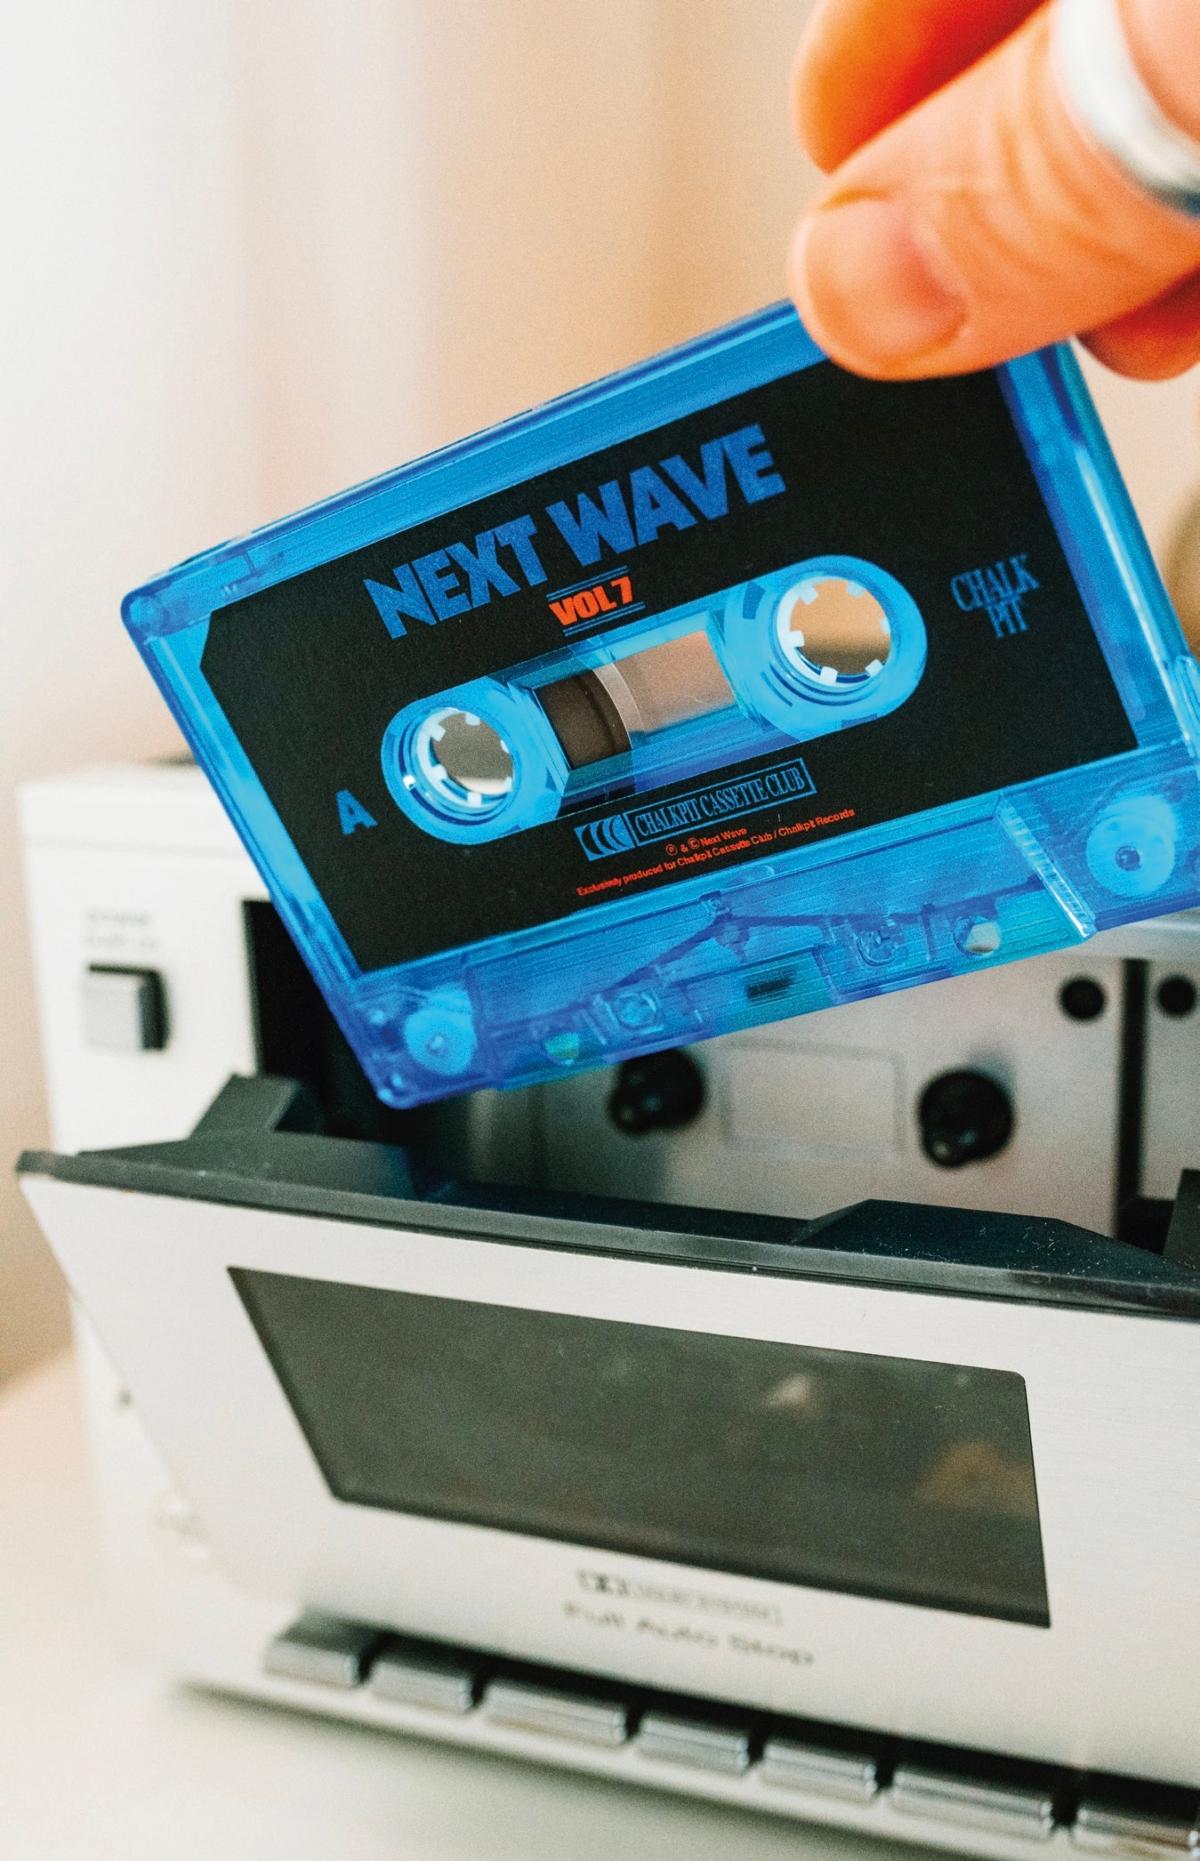 Cassette tapes are experiencing a boom among millennials and younger generations who appreciate the analog music experience. (National Audio Company)